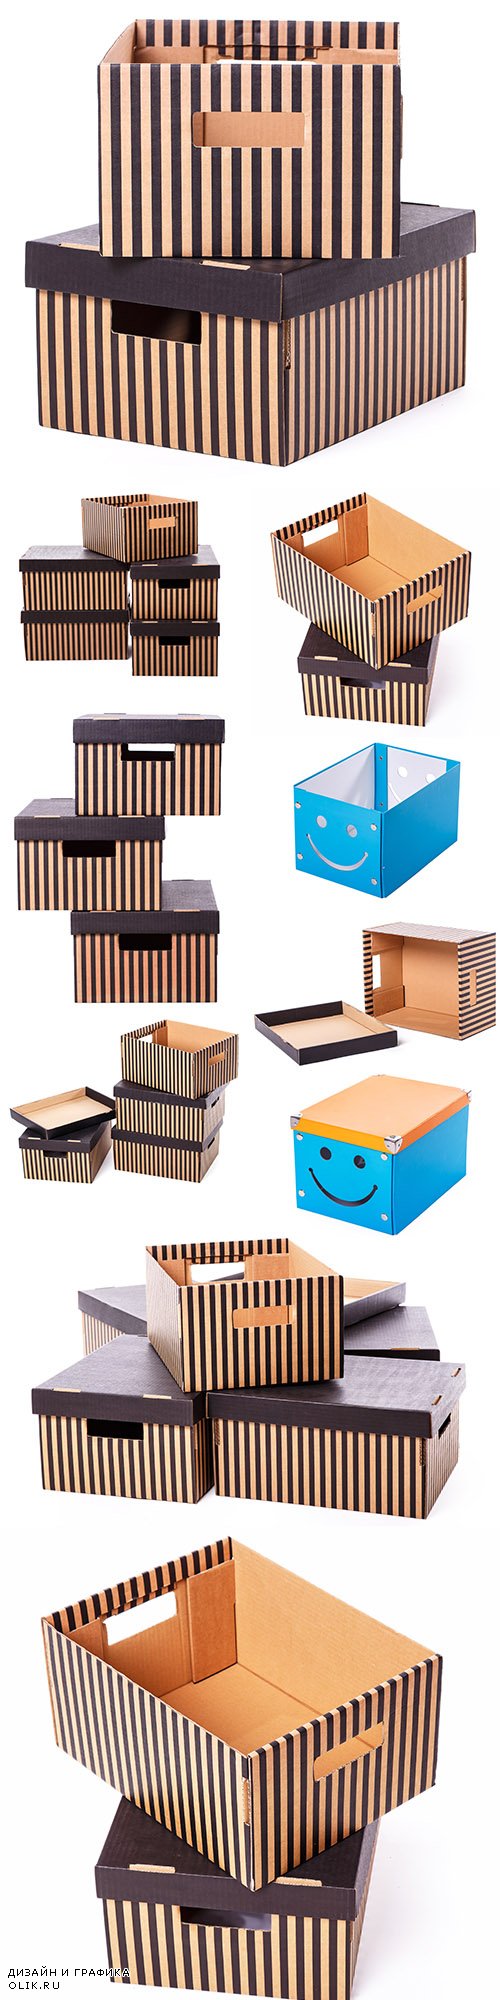 Boxes for storing and delivering items to office